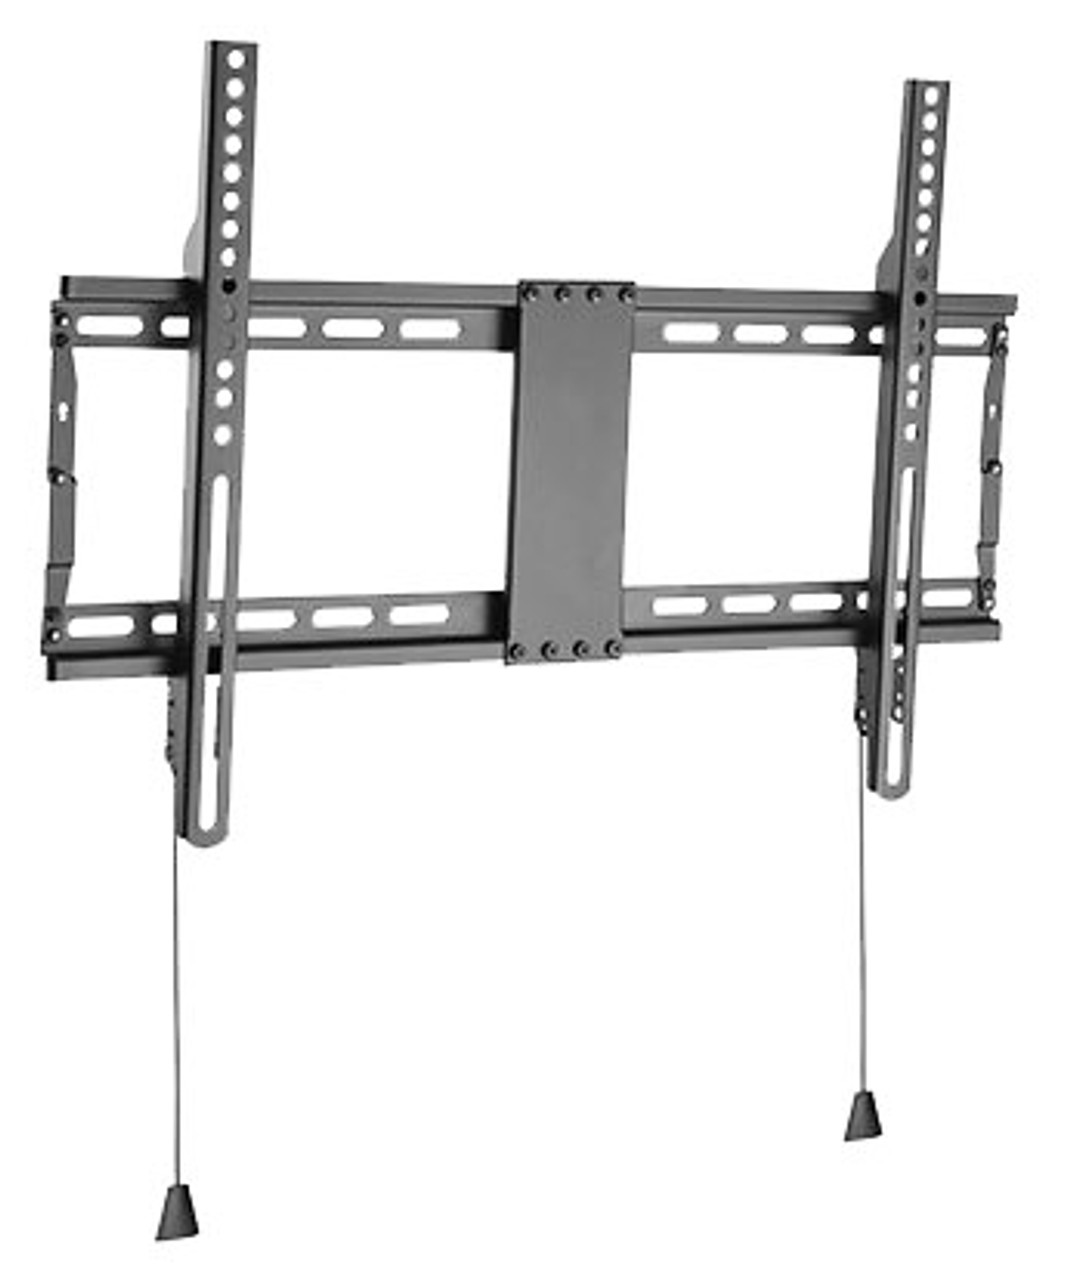 Quantum Sphere QP5946F 6-In-One 40"-75" TV Wall Mount Starter Kit